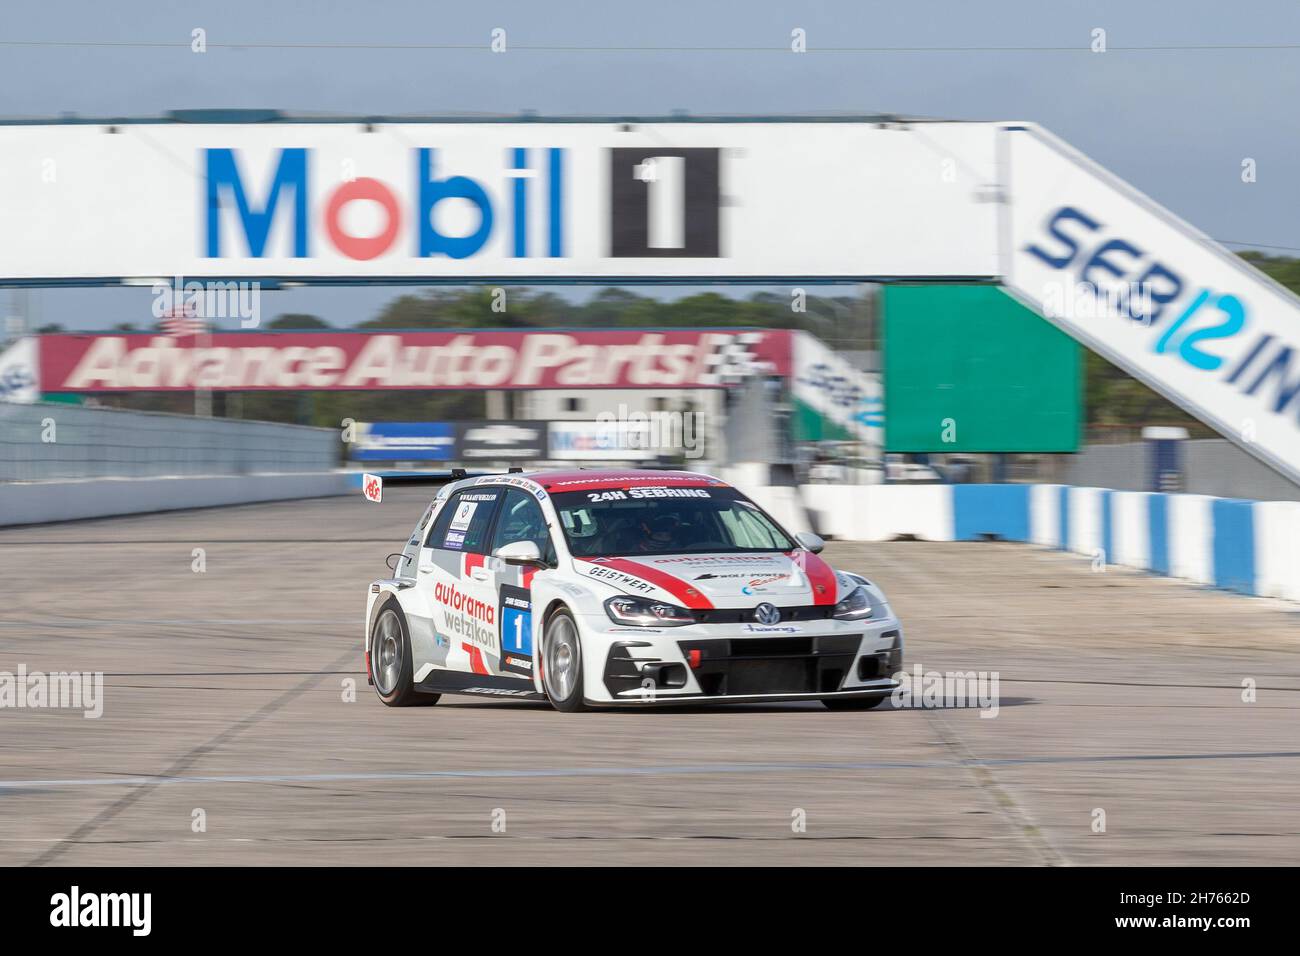 Sebring, USA. 19th Nov, 2021. 1 Autorama Motorsportby Wolf-Power Racing Volkswagen Golf GTi TCR DSG:Constantin Kletzer, Emil Heyerdahl, Fabian Danz, Jasmin Preisig during the 24H Series powered by Hankook. Schedule includes USA stops on November 19-21, 2021. Racing cars from the many countries, such as: Germany, USA, France, Nederland, Romania, Denmark, Canada, Spain, Great Britain, Italy; in many different classes: GT4, 991, GTX, GT3, TCR, TCX, P4. (Photo by Yaroslav Sabitov/YES Market Media/Sipa USA) Credit: Sipa USA/Alamy Live News Stock Photo